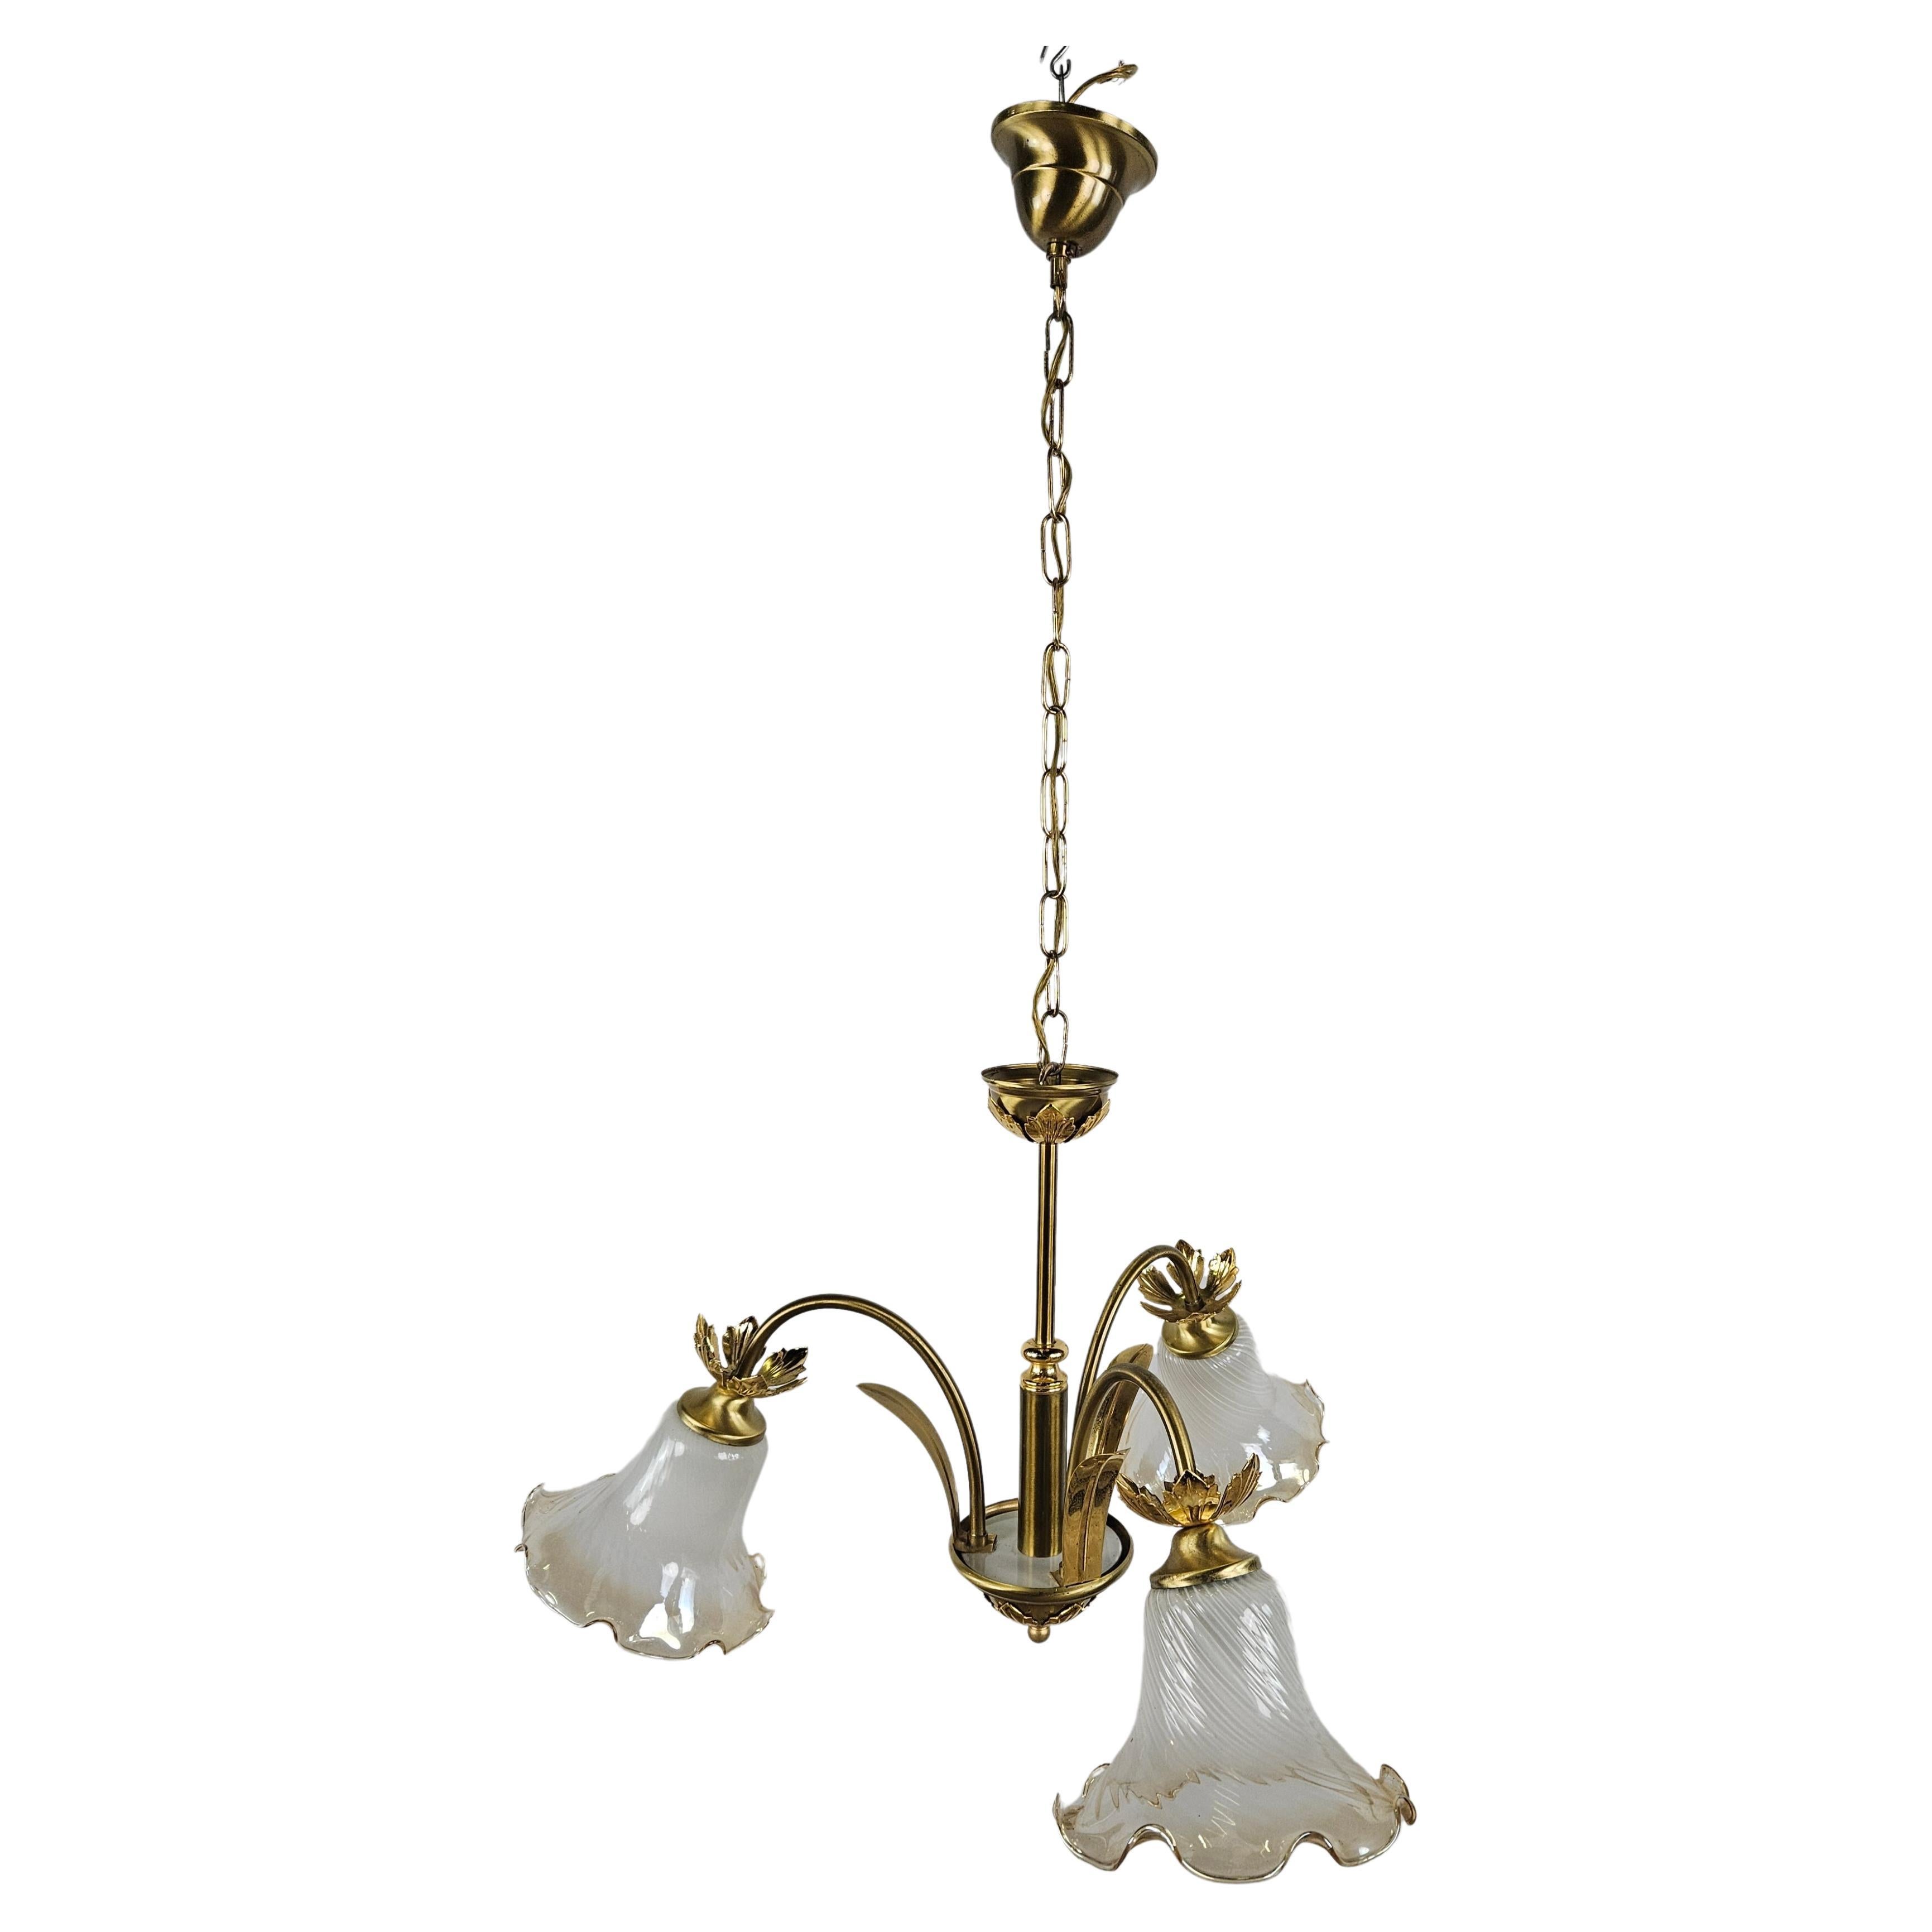 1970s Art Nouveau style glass and brass chandelier i197n For Sale